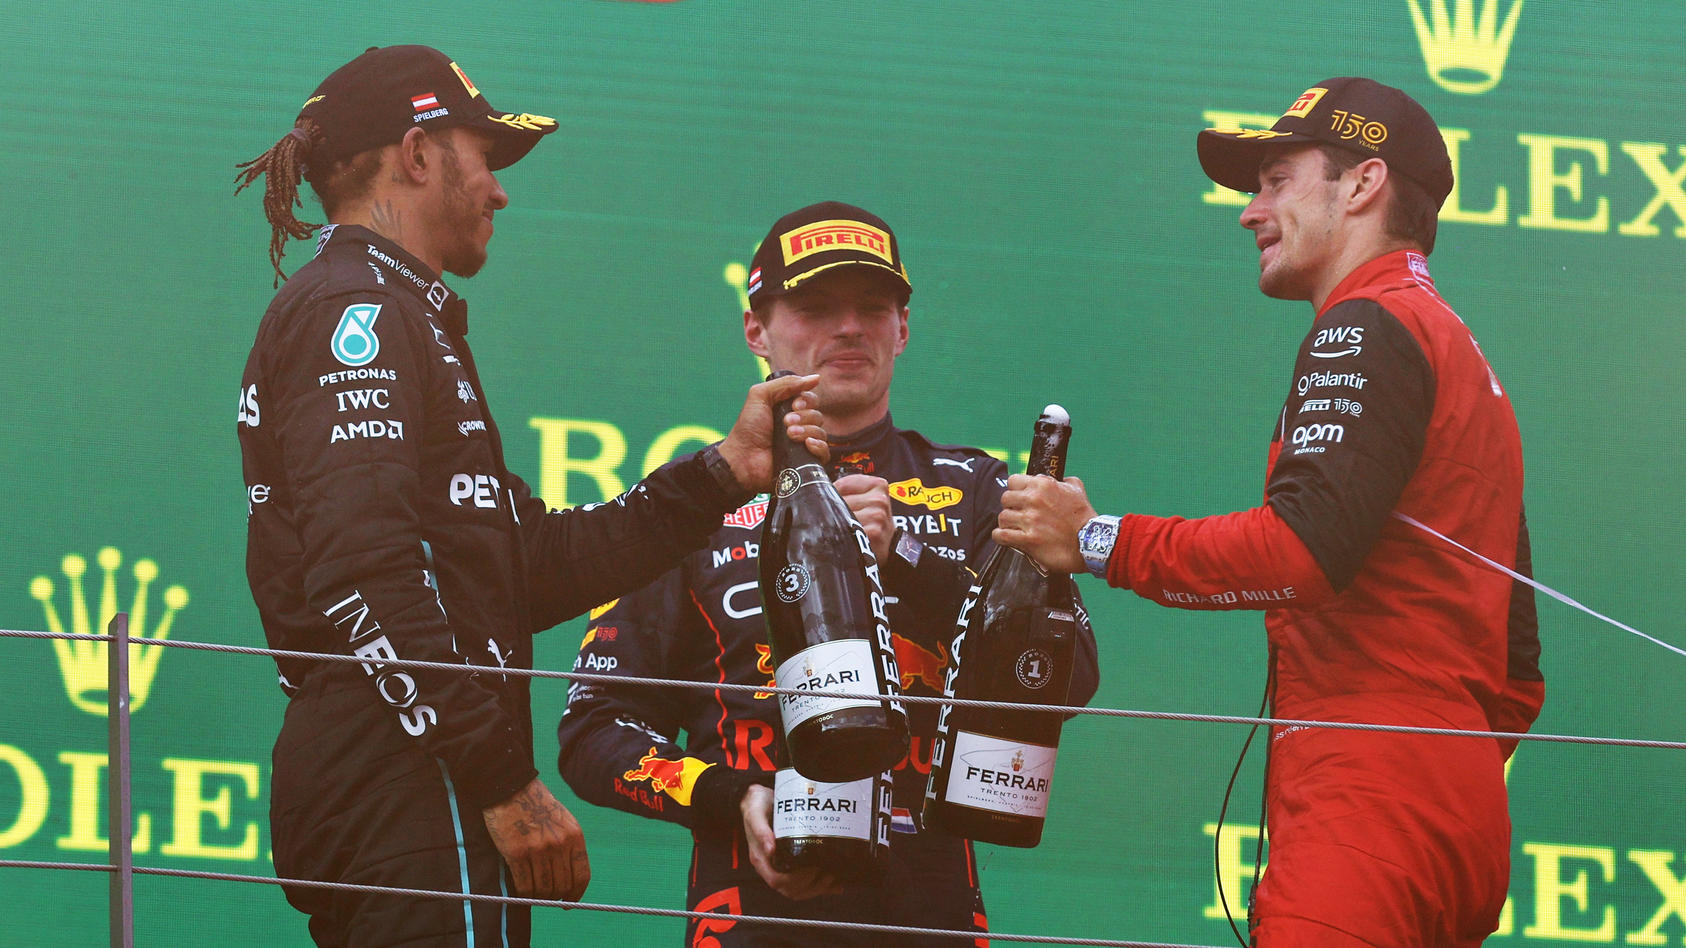 SPIELBERG, AUSTRIA - JULY 10: Race winner Charles Leclerc of Monaco and Ferrari, Second placed Max Verstappen of the Netherlands and Oracle Red Bull Racing and Third placed Lewis Hamilton of Great Britain and Mercedes celebrate on the podium during t